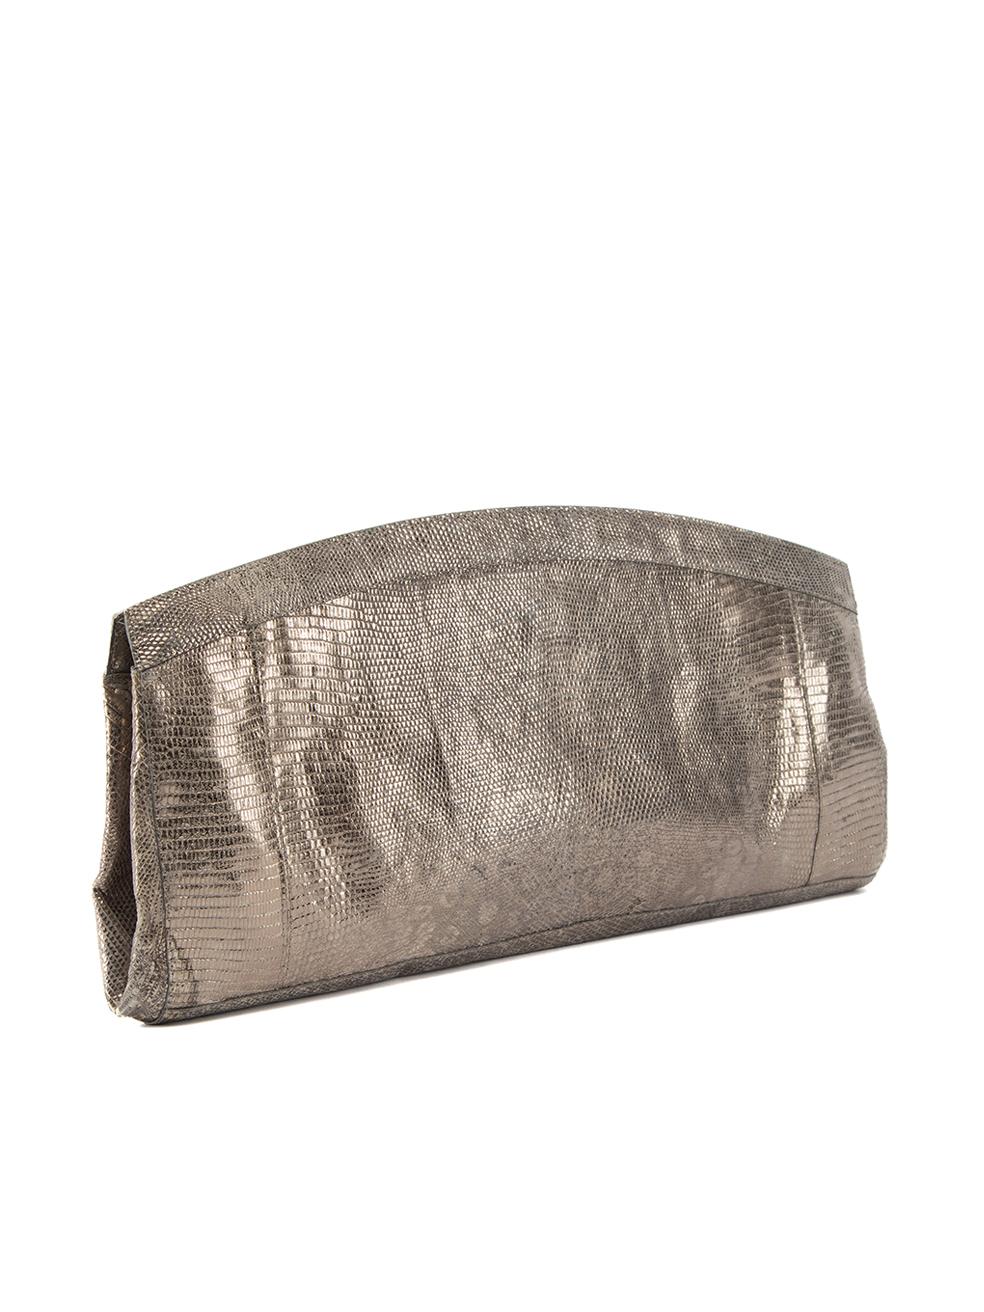 CONDITION is Very good. Minimal wear to clutch is evident. Minimal wear to the metallic exterior, however there are visible stains to the suede interior where makeup stain and other marks can be seen on this used Nancy Gonzalez designer resale item.